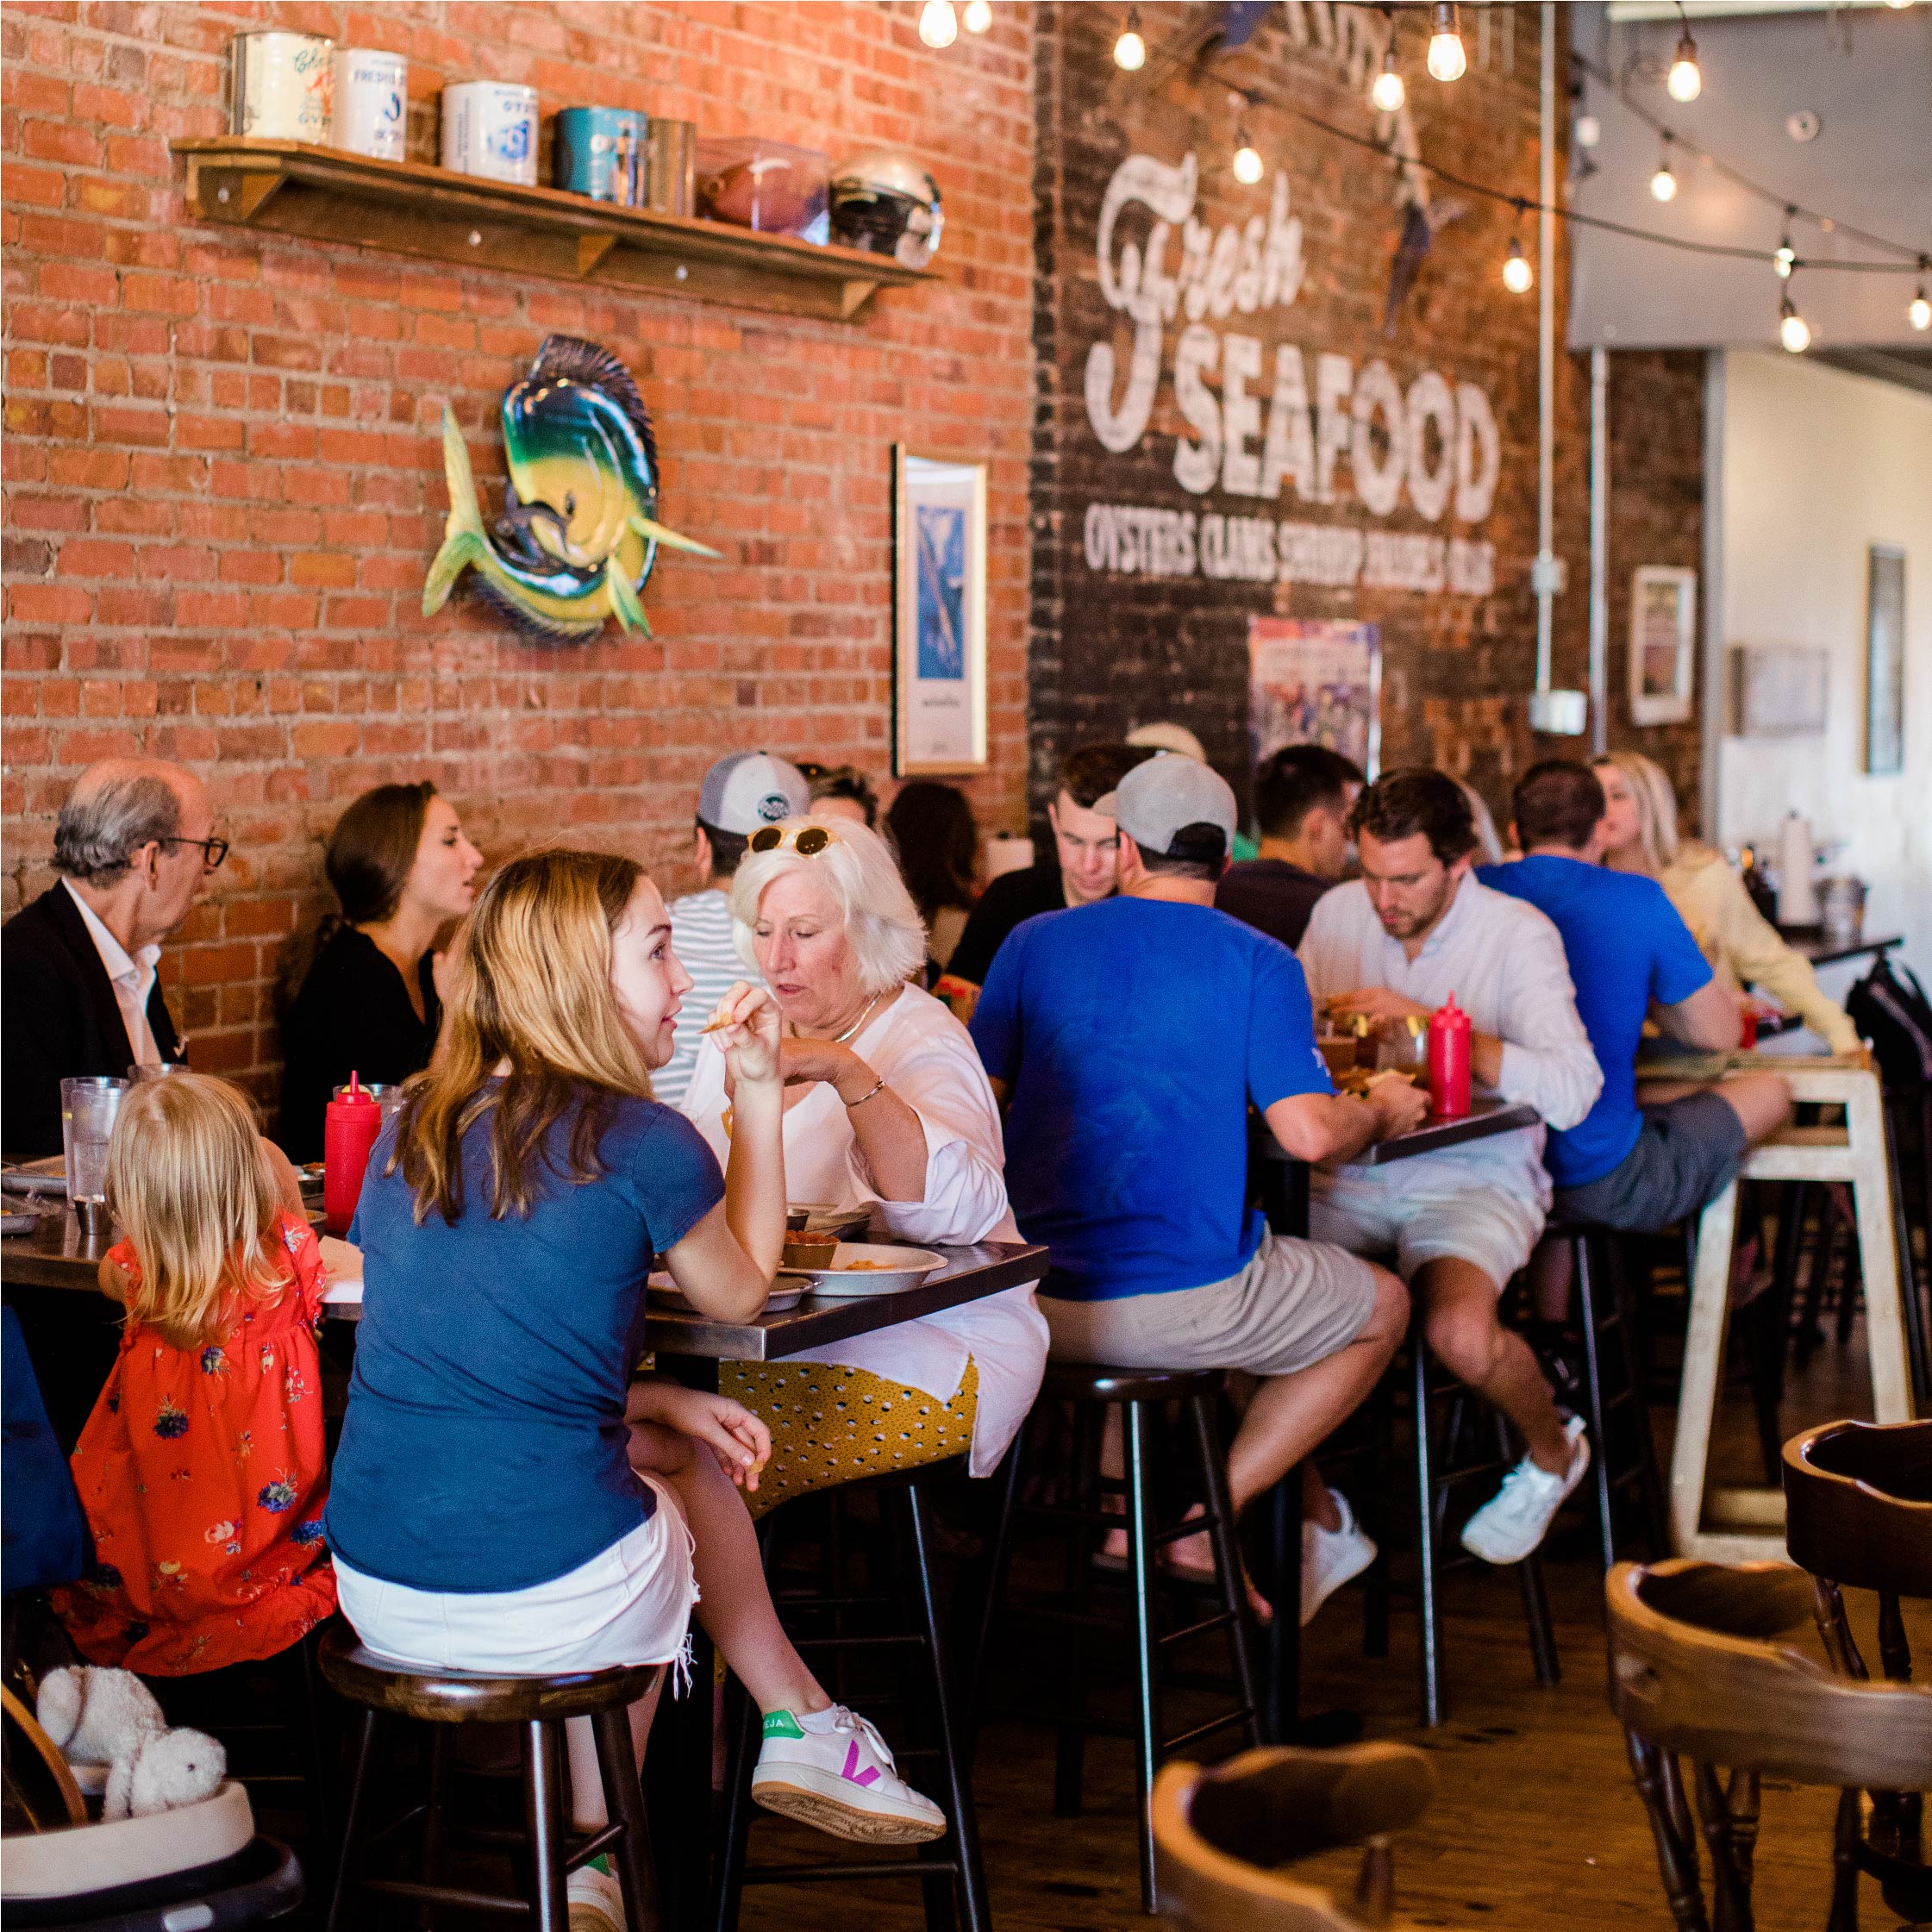 Be the first to open a Shuckin' Shack Oyster Bar fast casual franchise in your community.